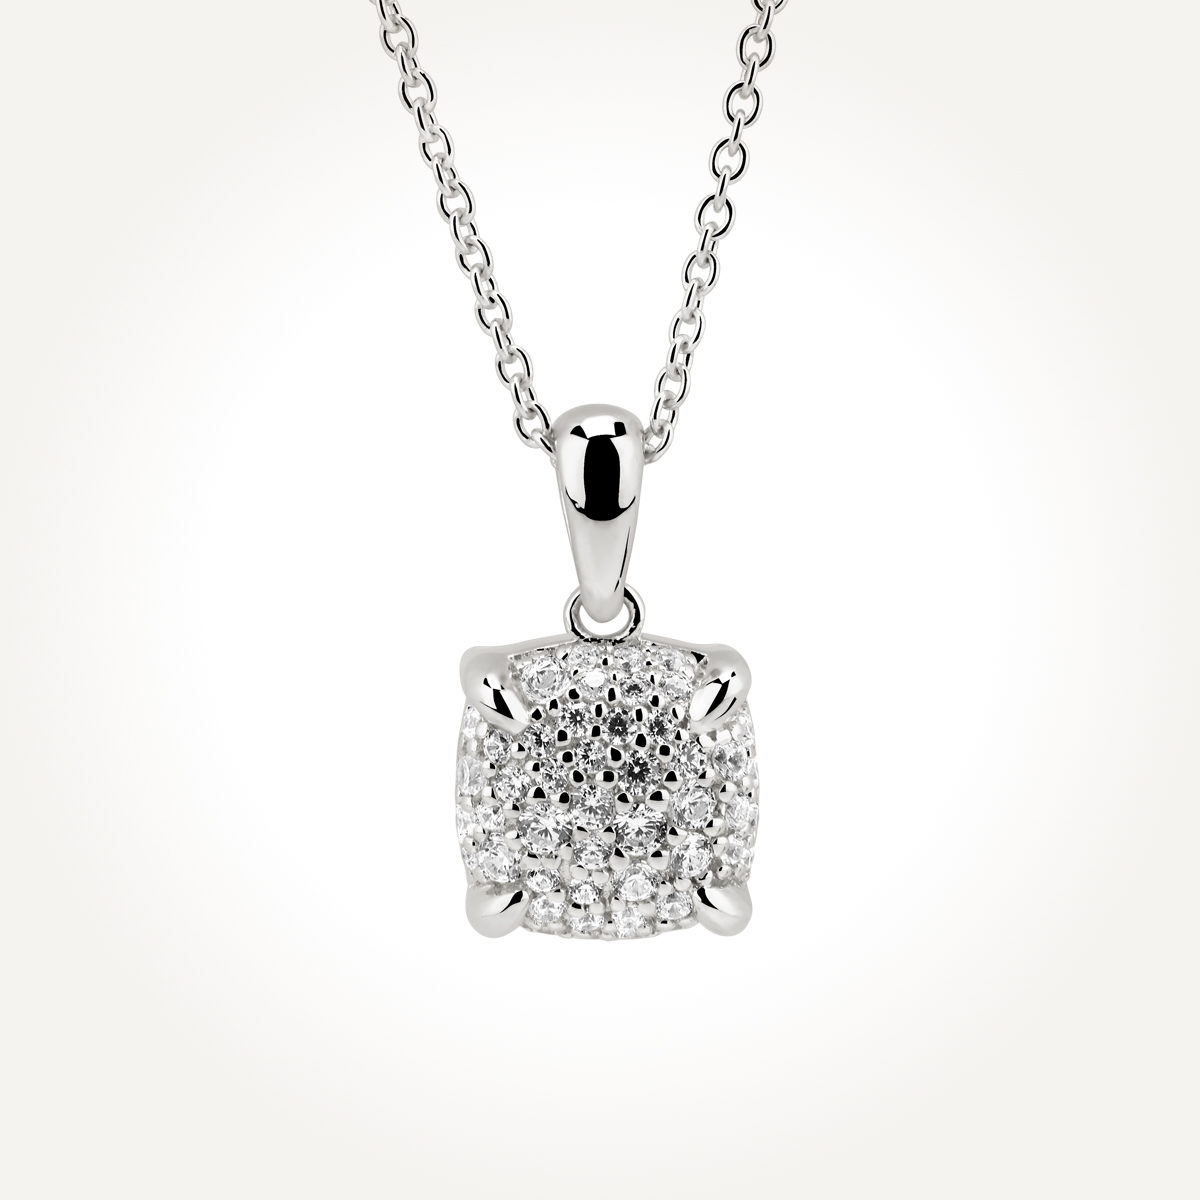 14KT White Gold Square Cluster Necklace 0.29 CT. T.W.